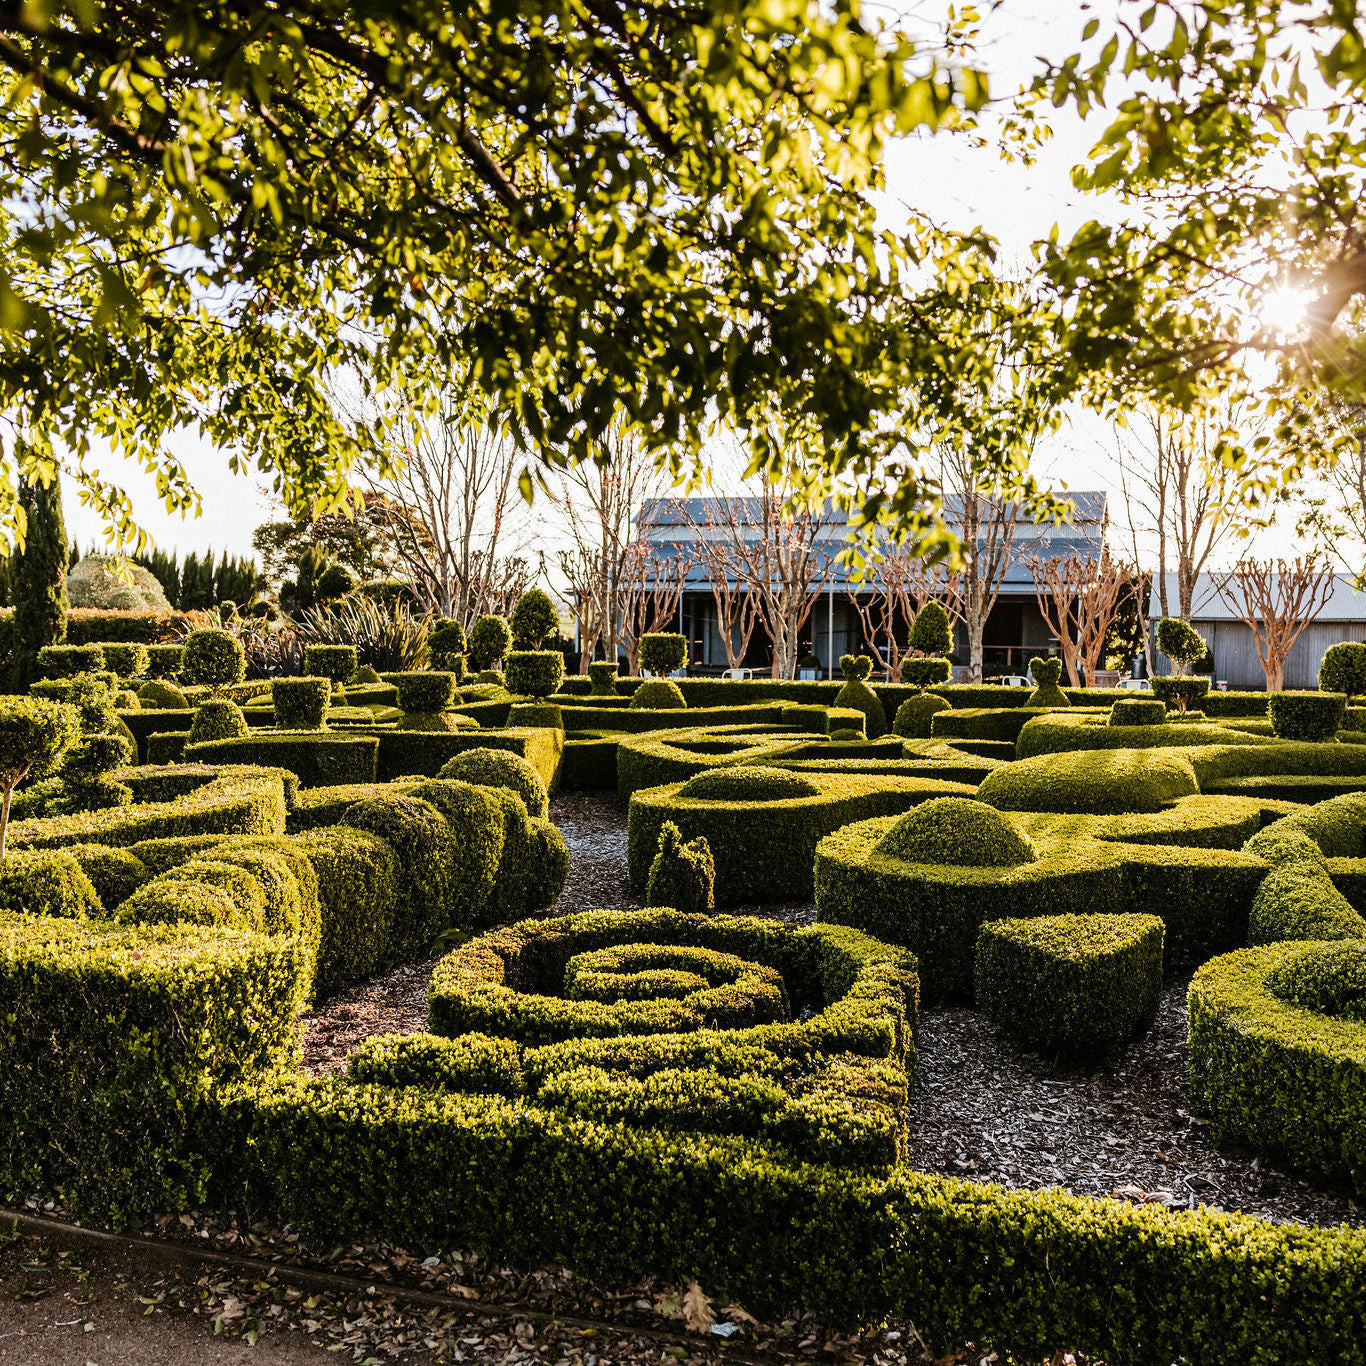 The Topiary & Hedging Festival - General Admission